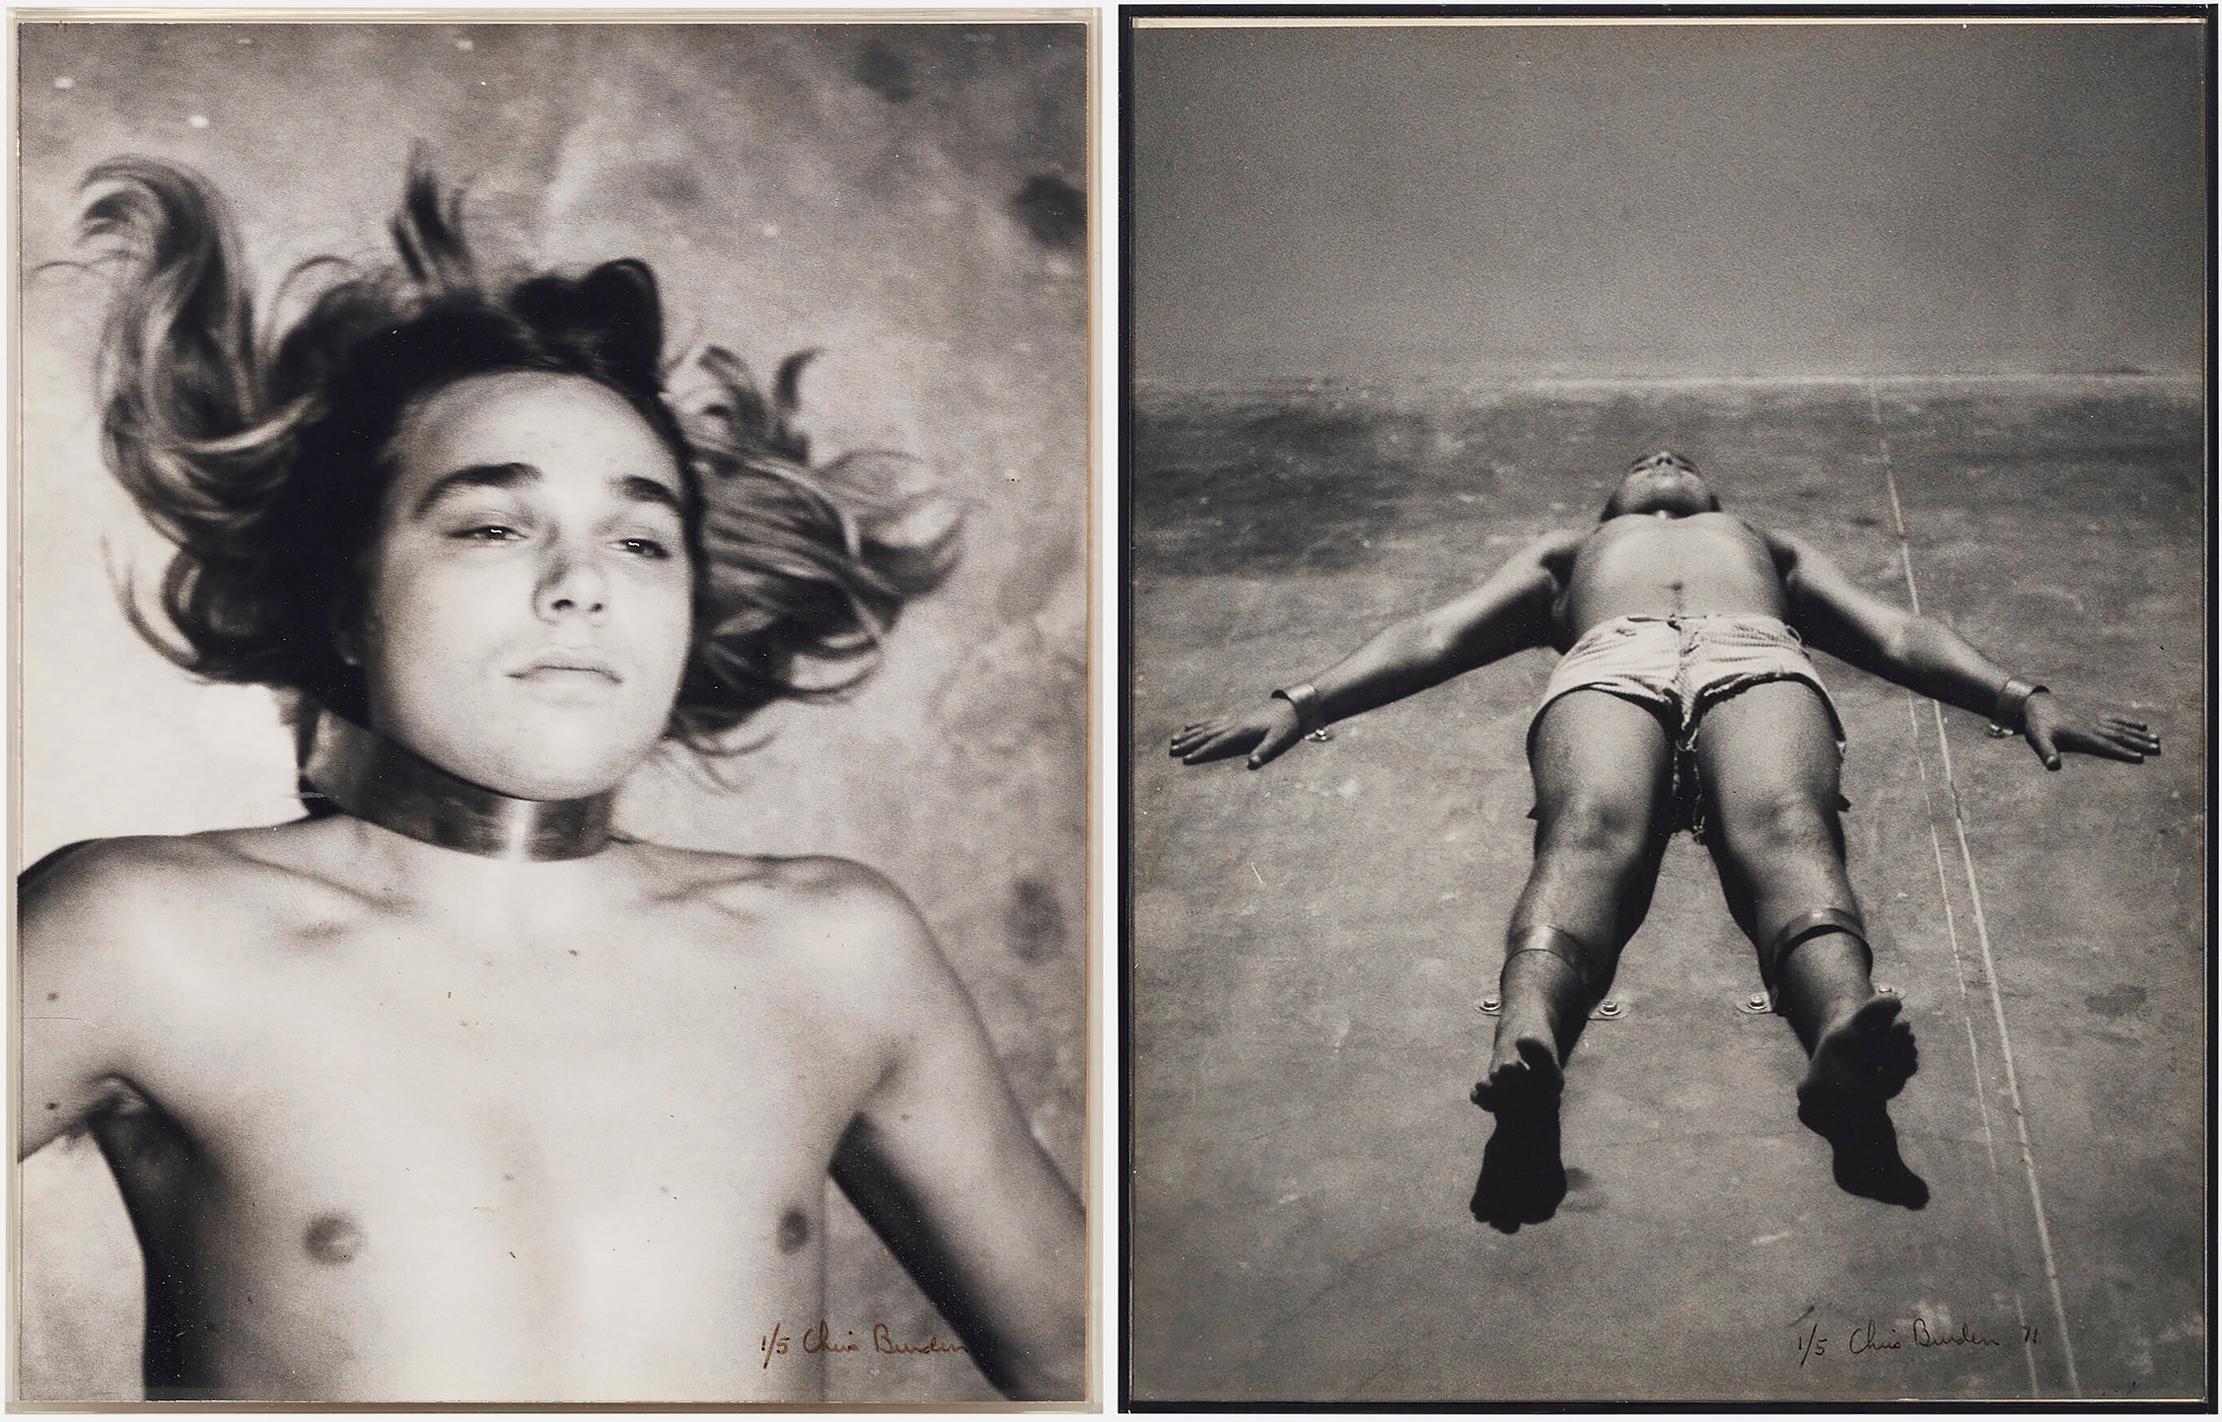 Chris Burden Portrait Photograph - Prelude to 220, or 110 - A Shocking Performance Art